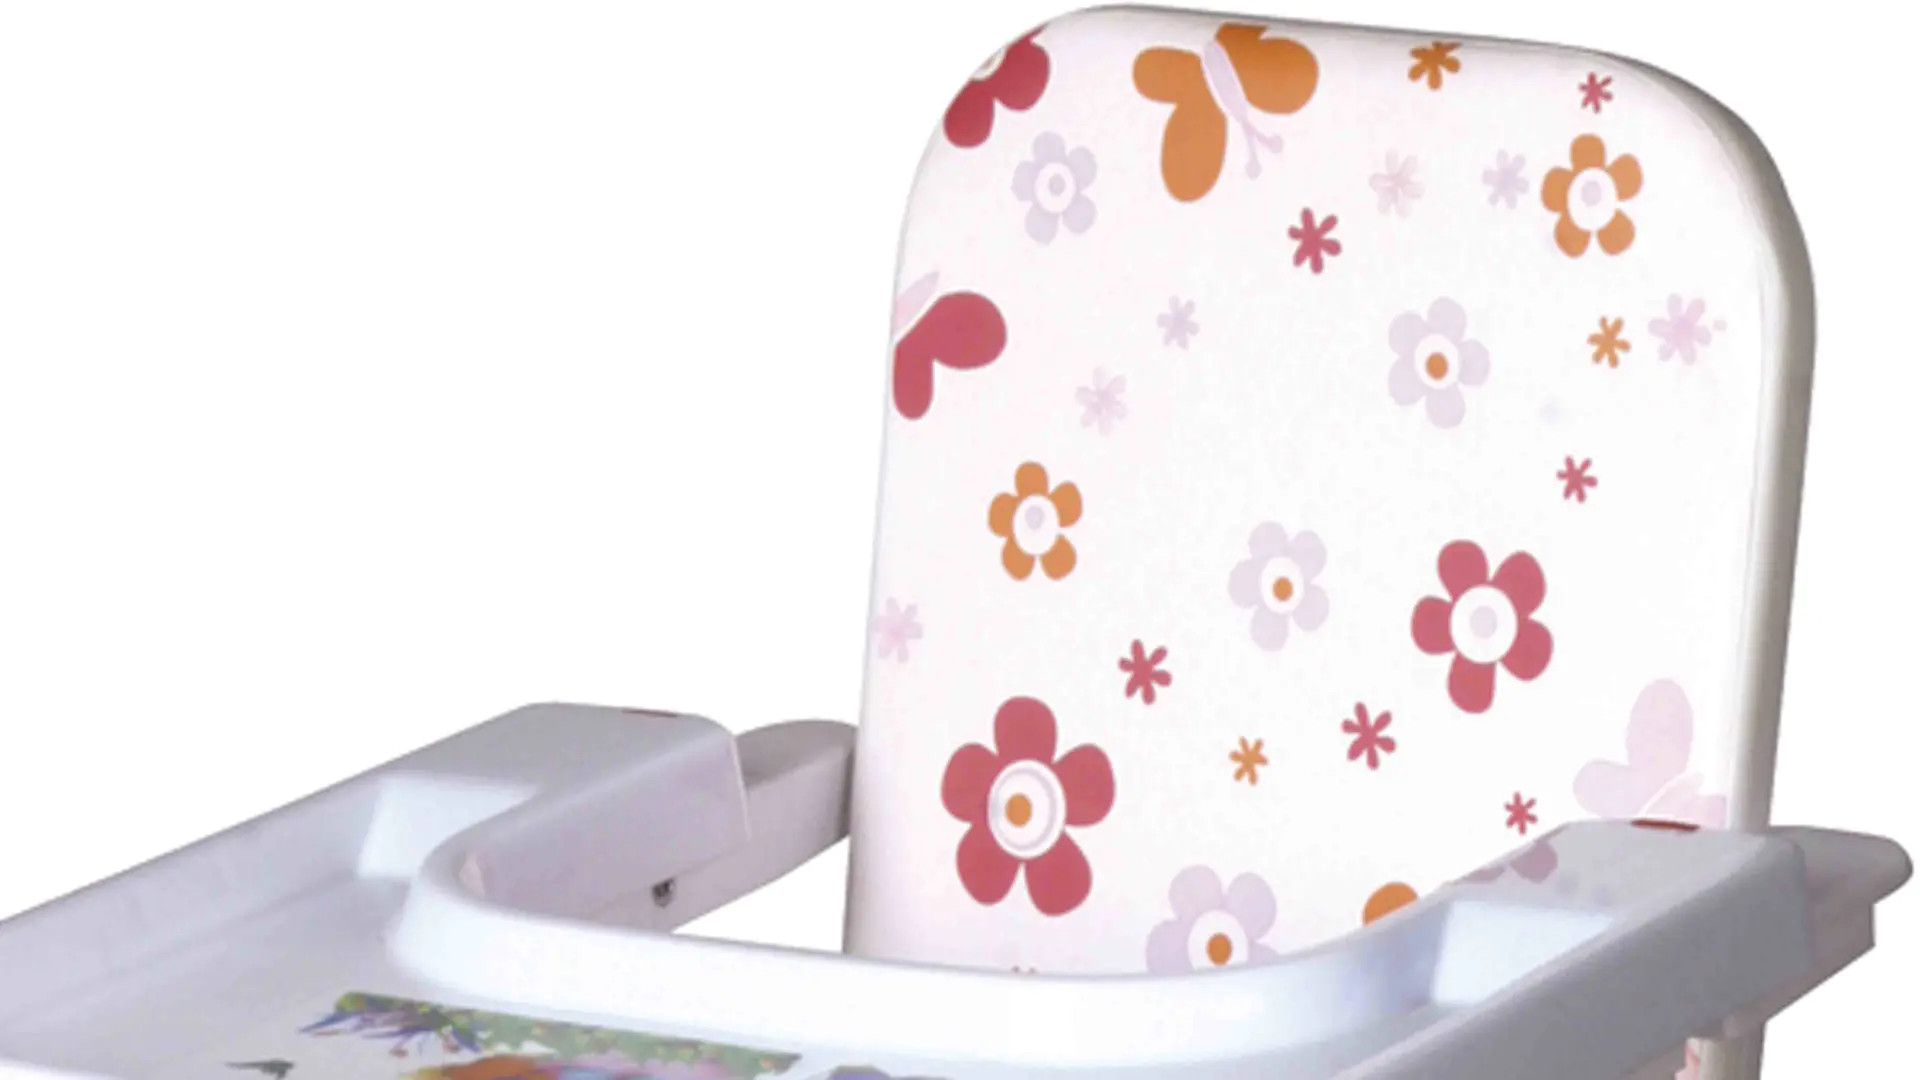 dining baby chair price directly sale for infant